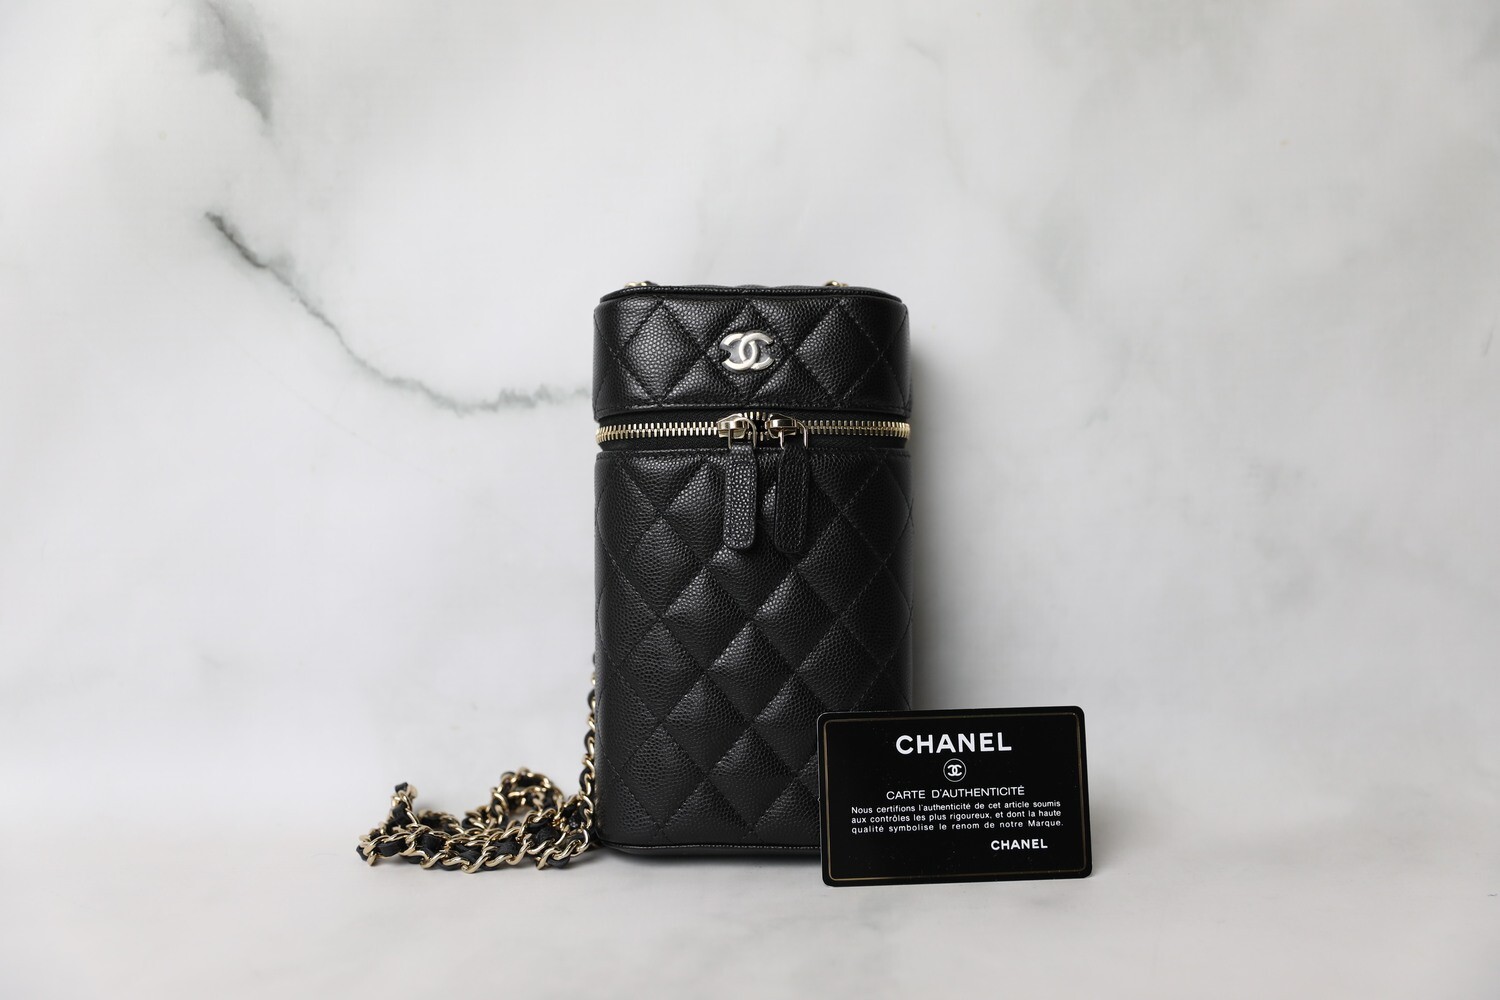 Chanel Vanity Phone Holder On Chain, Black Caviar with Gold